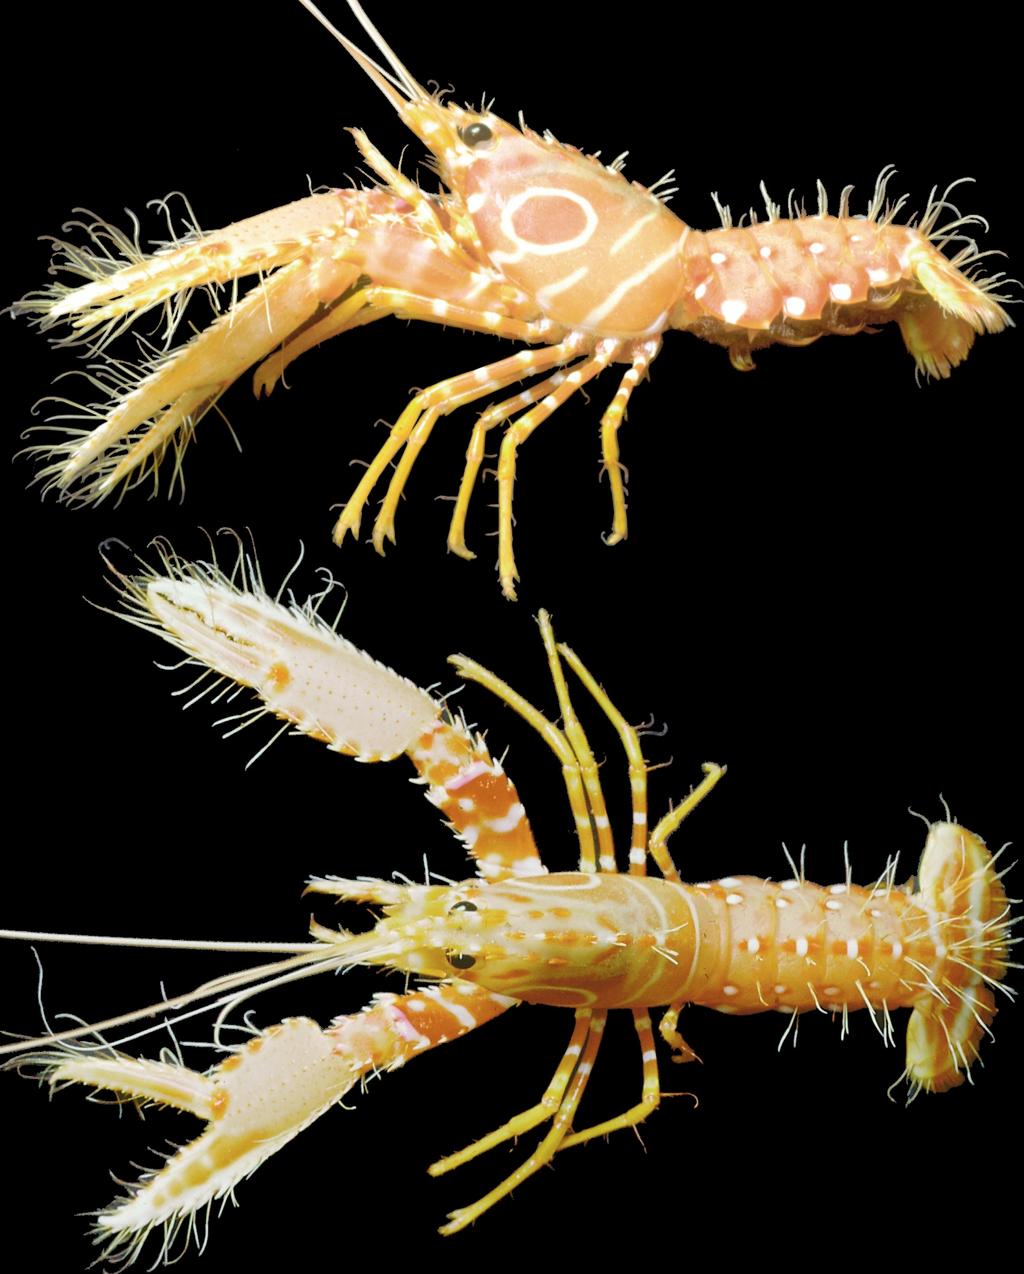 Lobsters Enoplometopus (Crustacea, Decapoda) from French Polynesia A B FIG. 2.